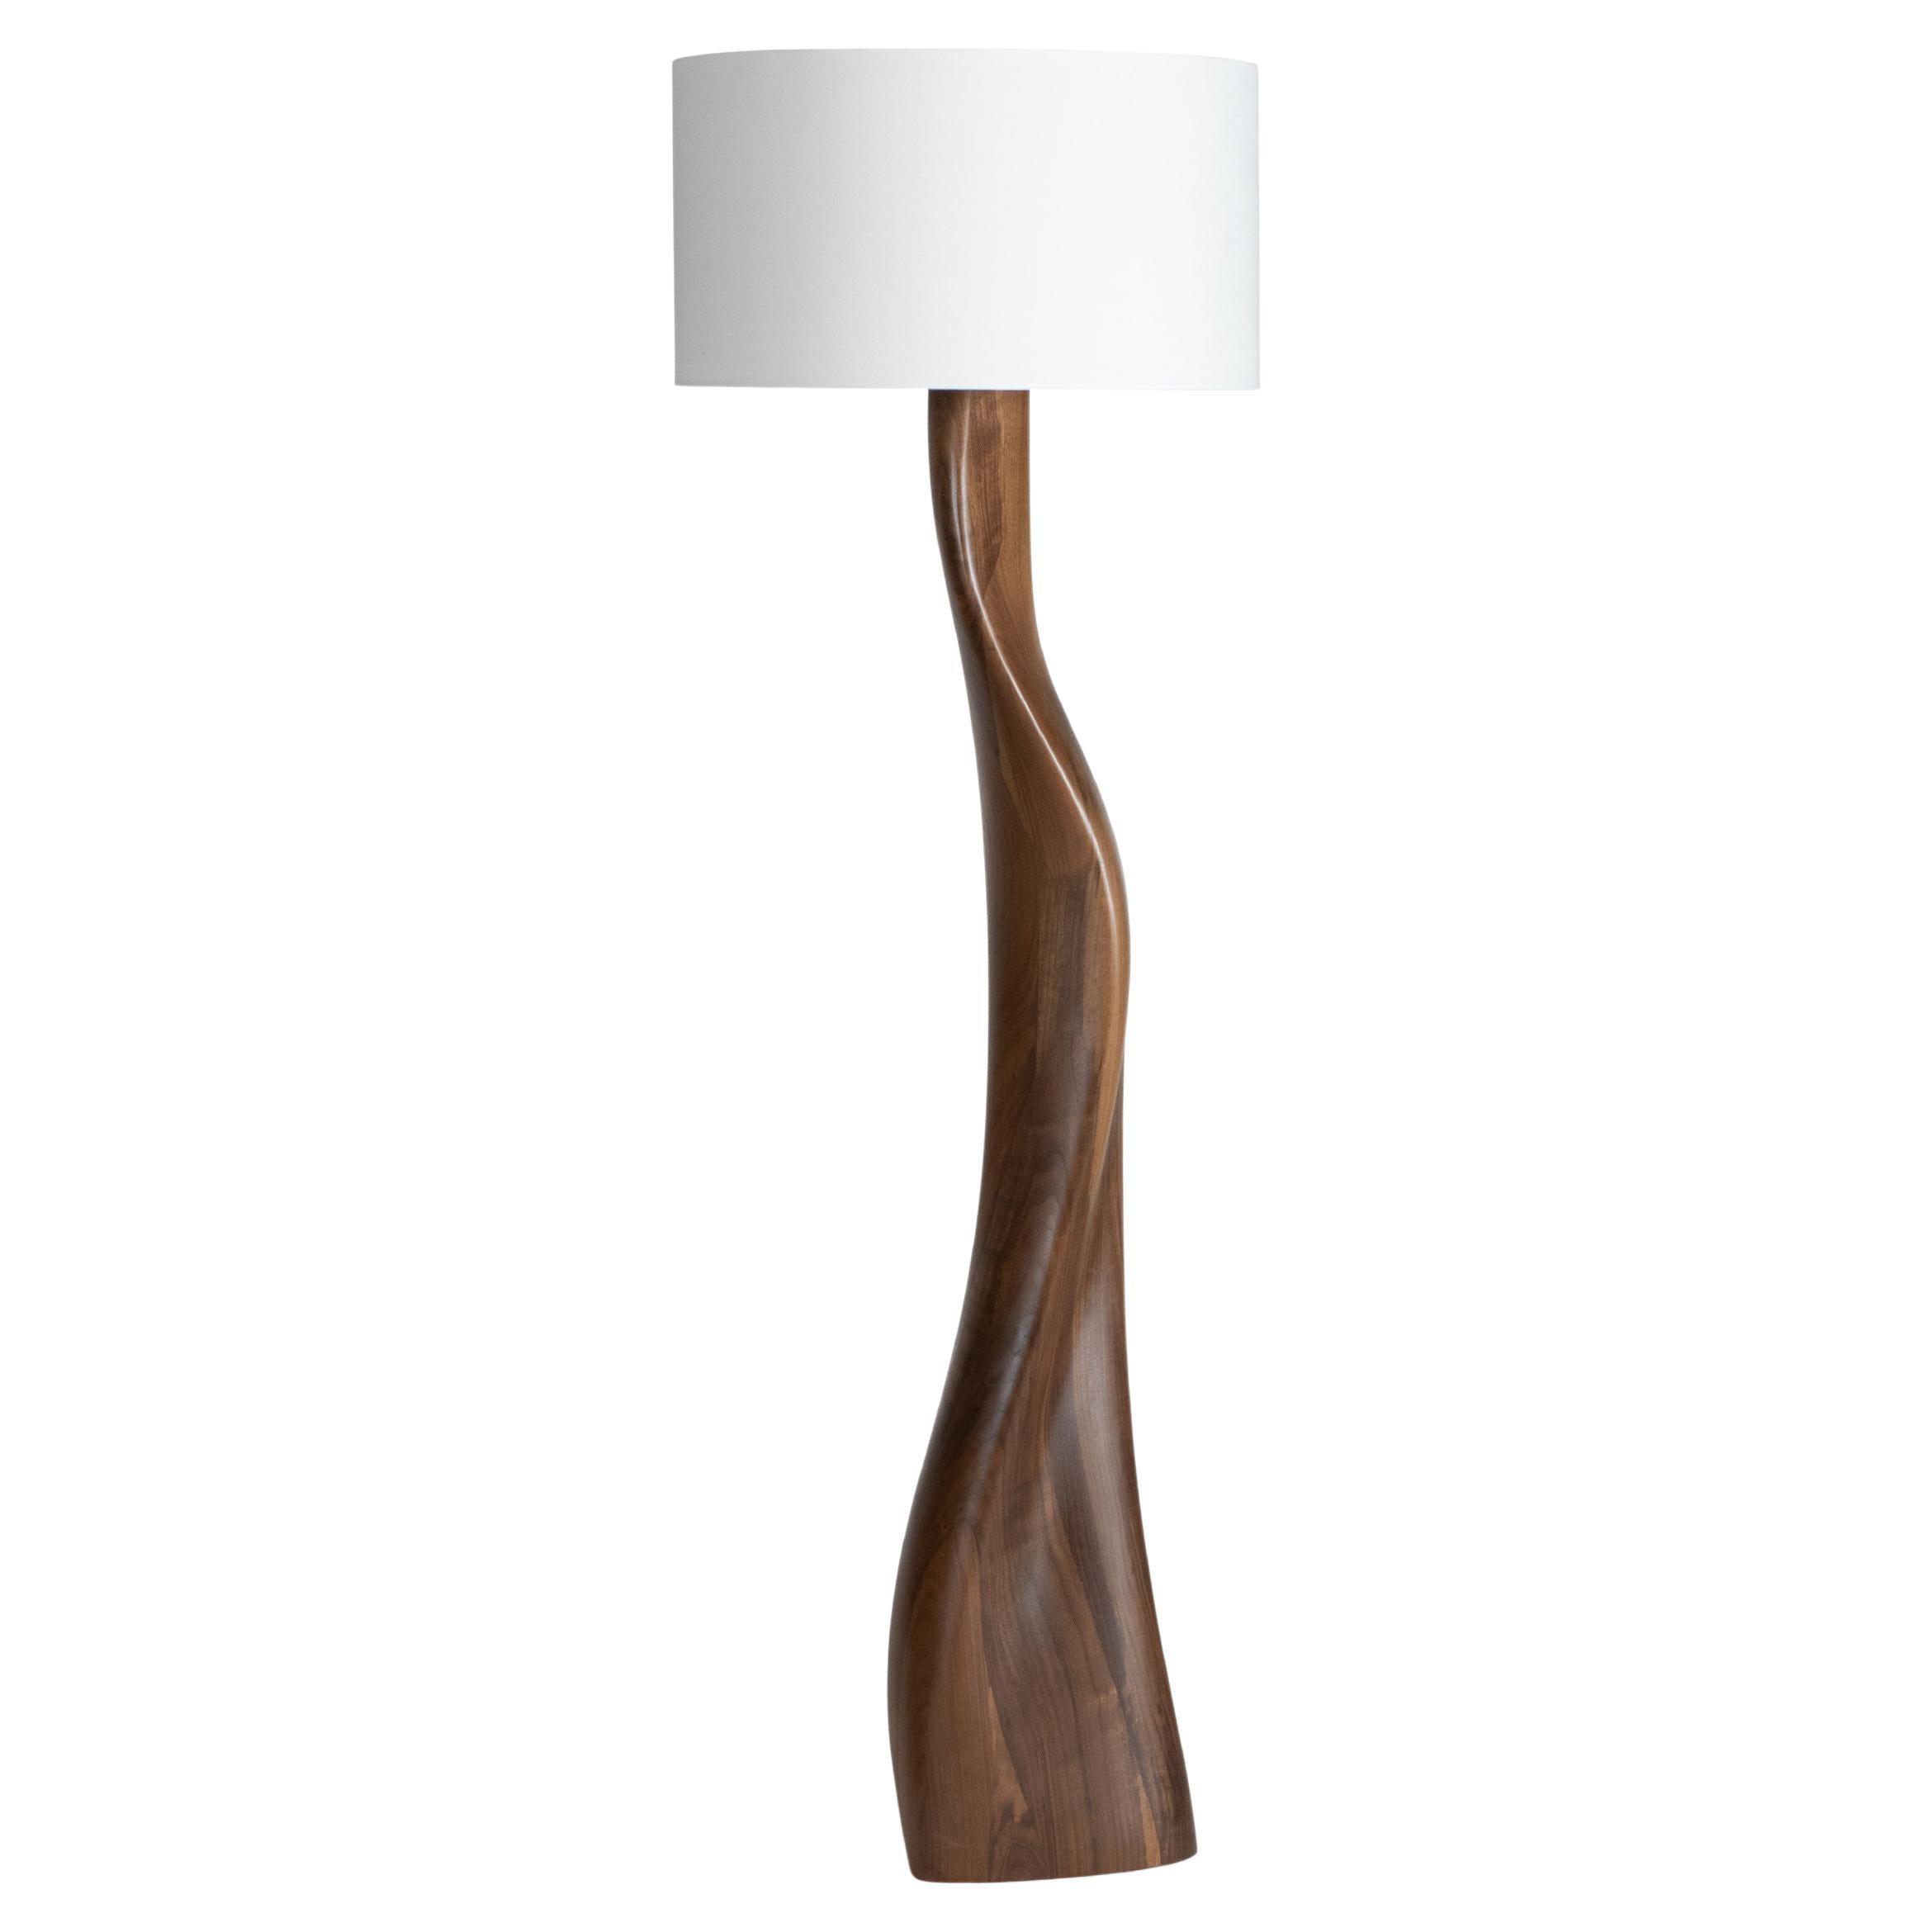 Amorph Roman floor lamp in Walnut wood with Natural stain and Ivory silk shade